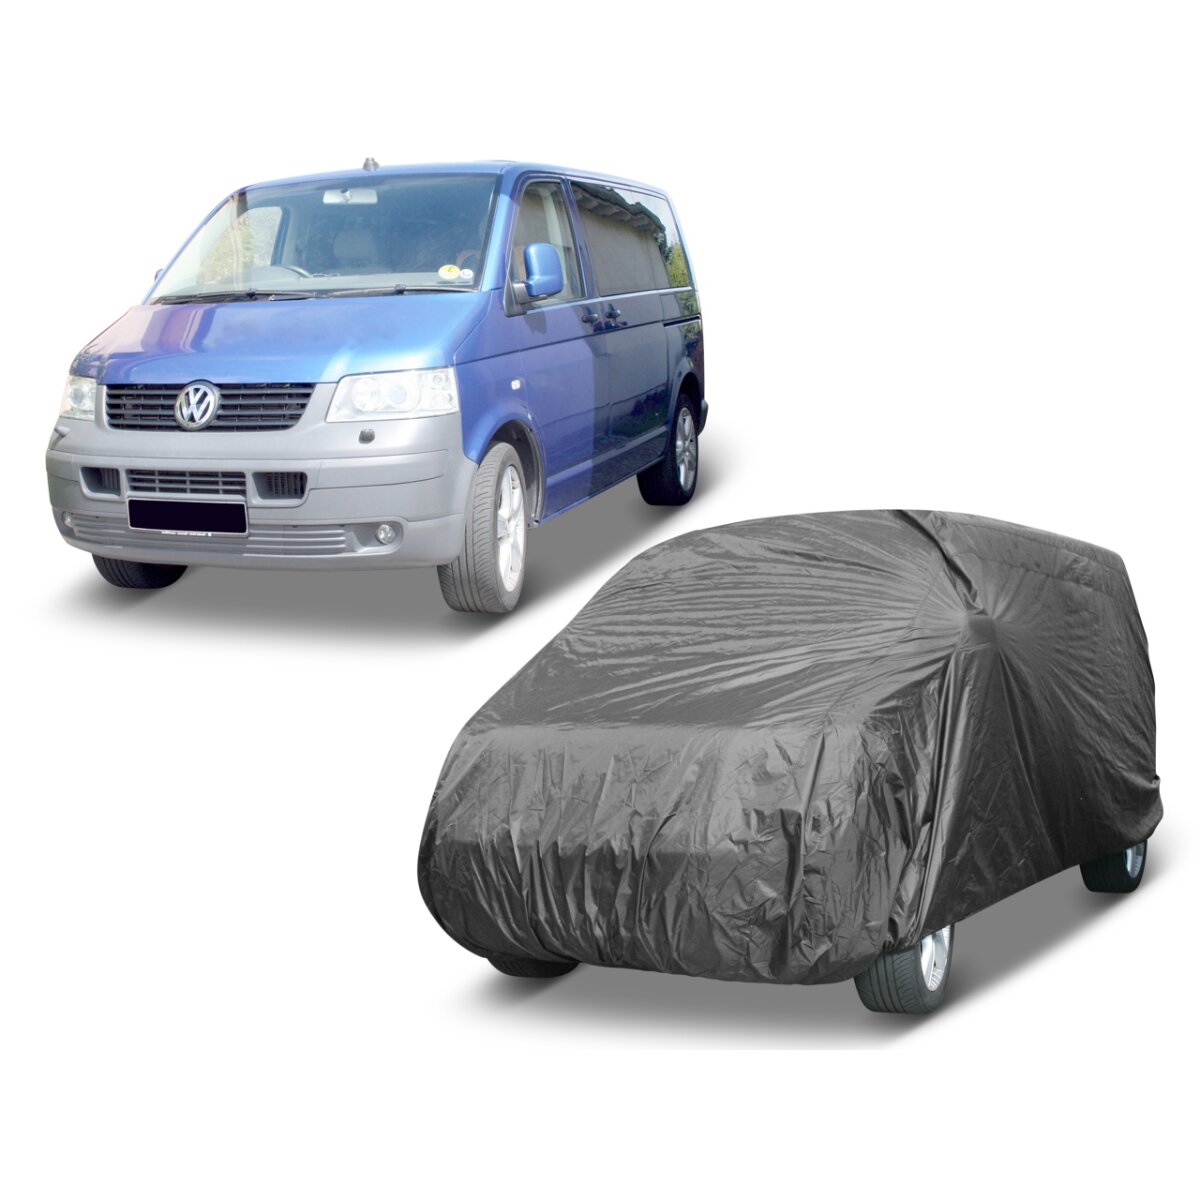 https://www.autoabdeckung.com/media/image/product/130/lg/car-cover-autoabdeckung-fuer-vw-bus-t4-t5t6-kastenwagen.jpg